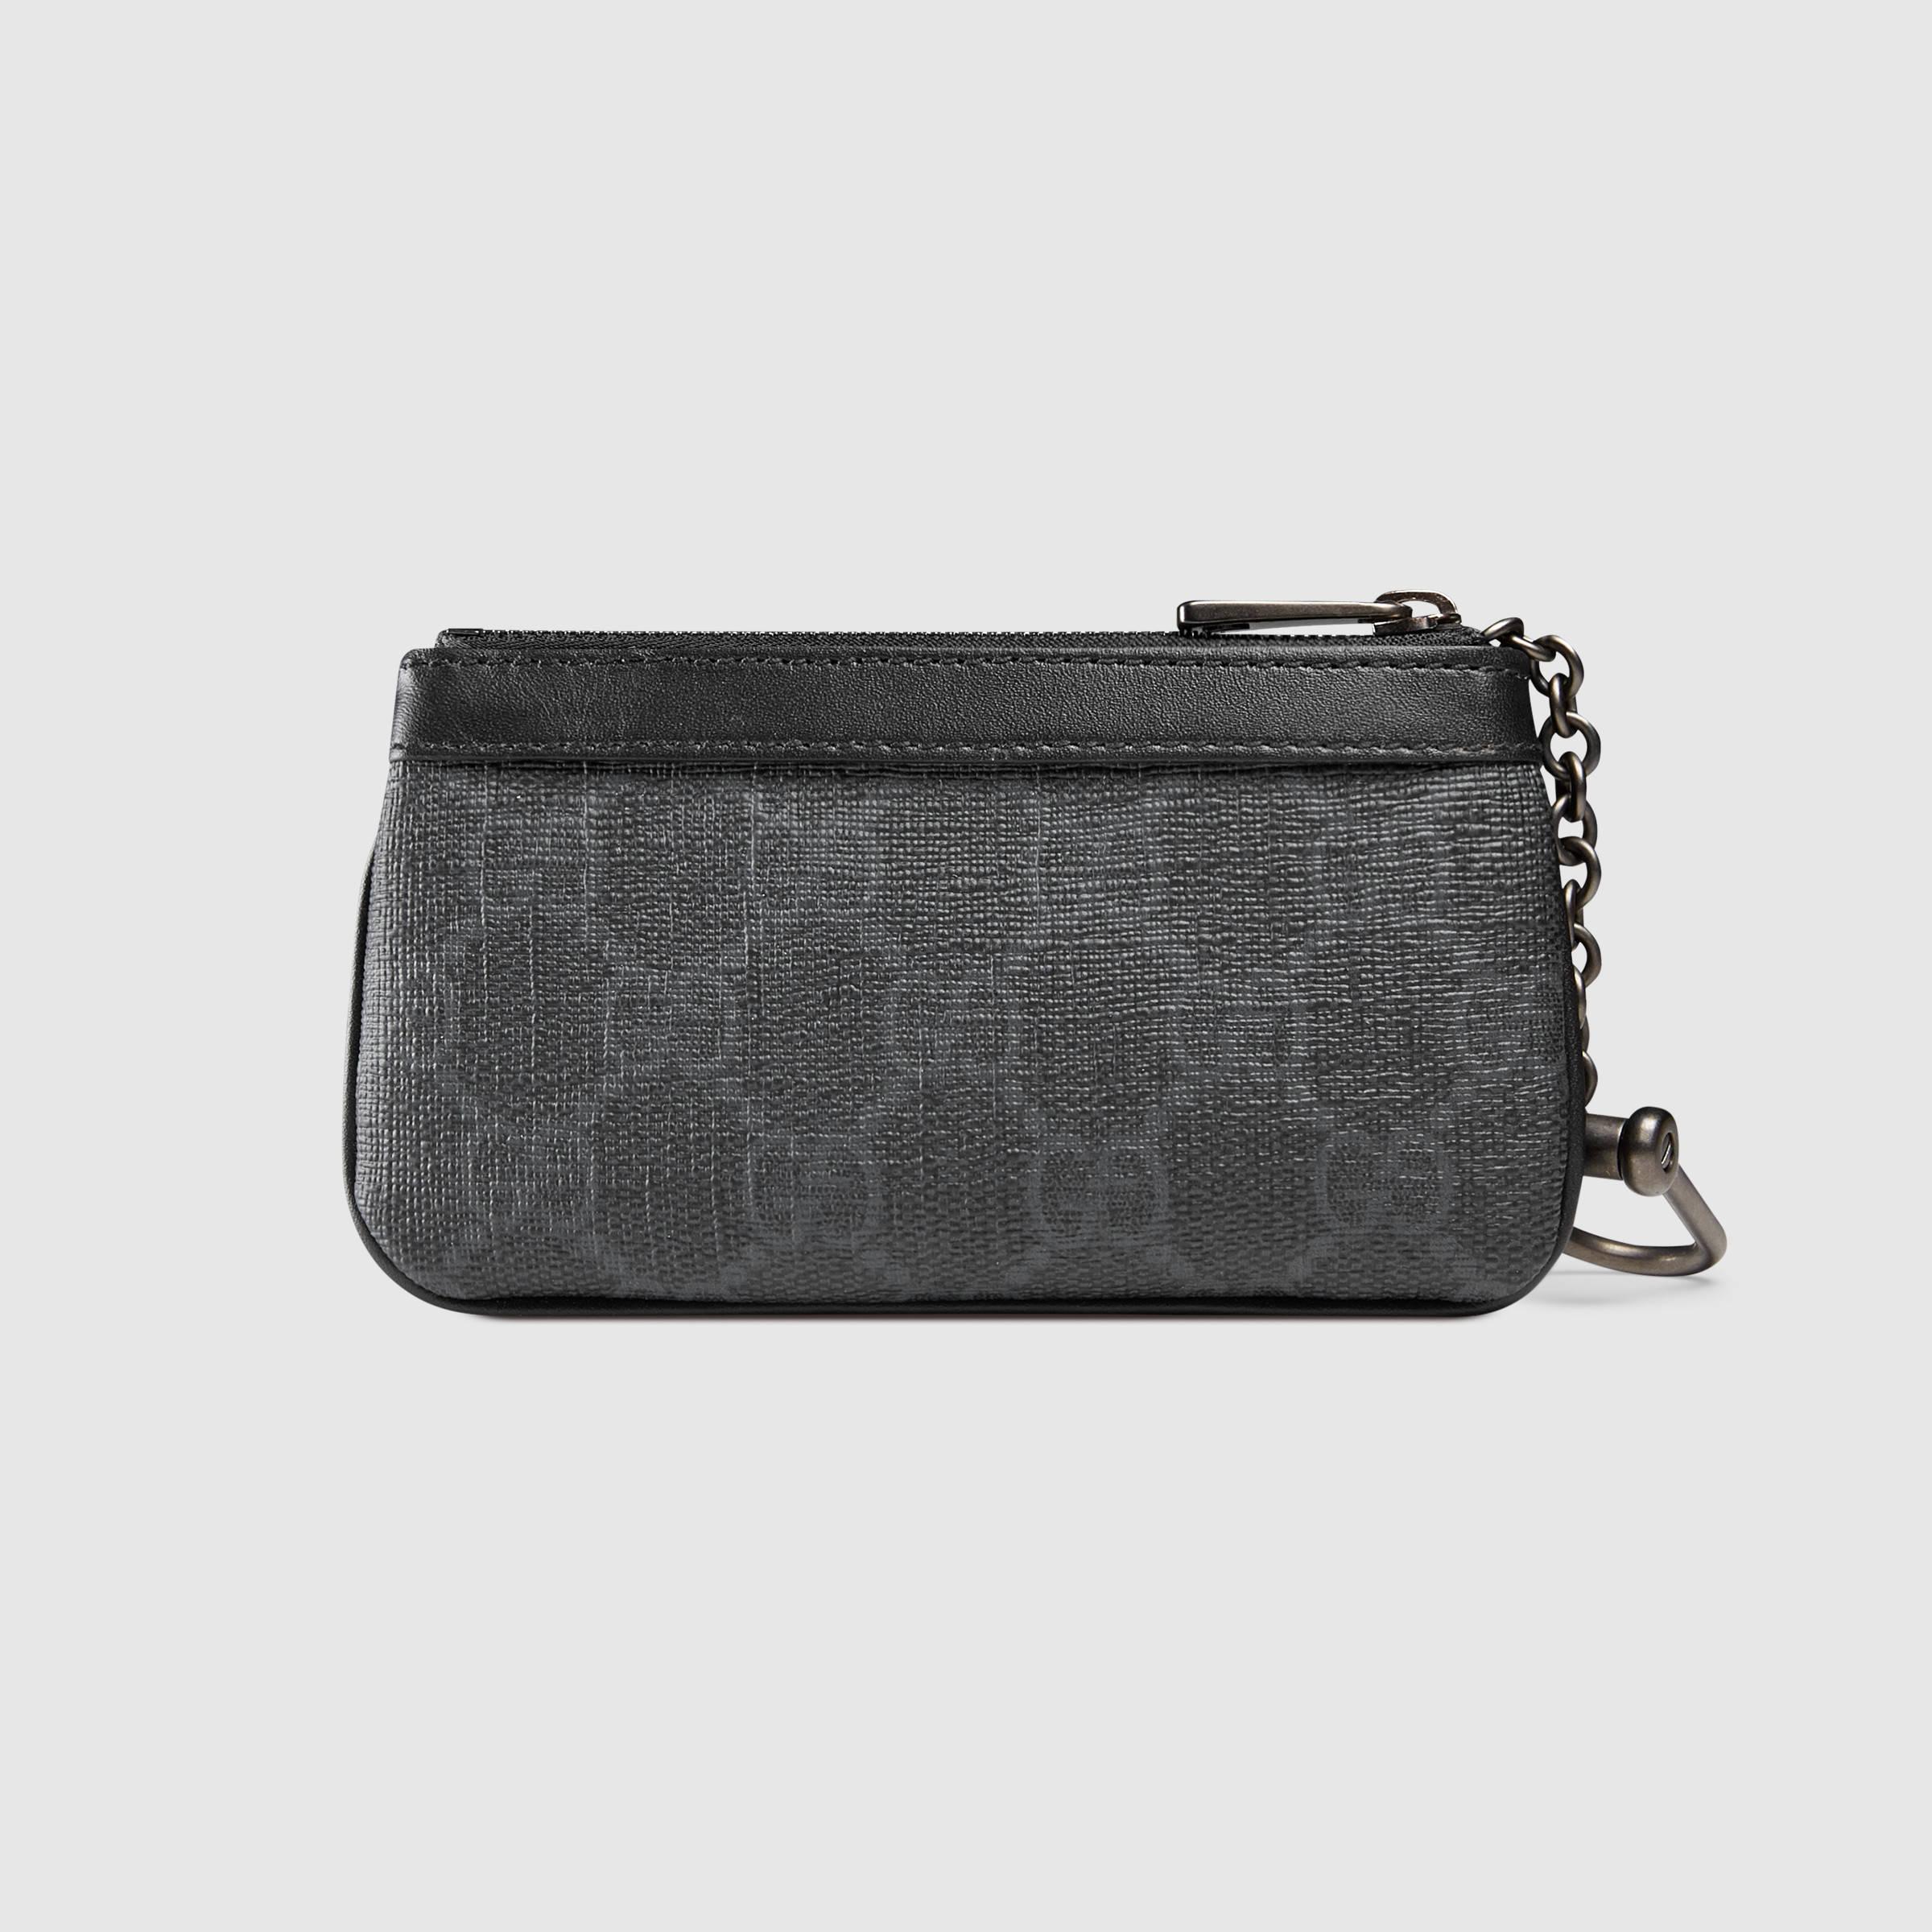 Lyst - Gucci Gg Supreme Key Ring Pouch